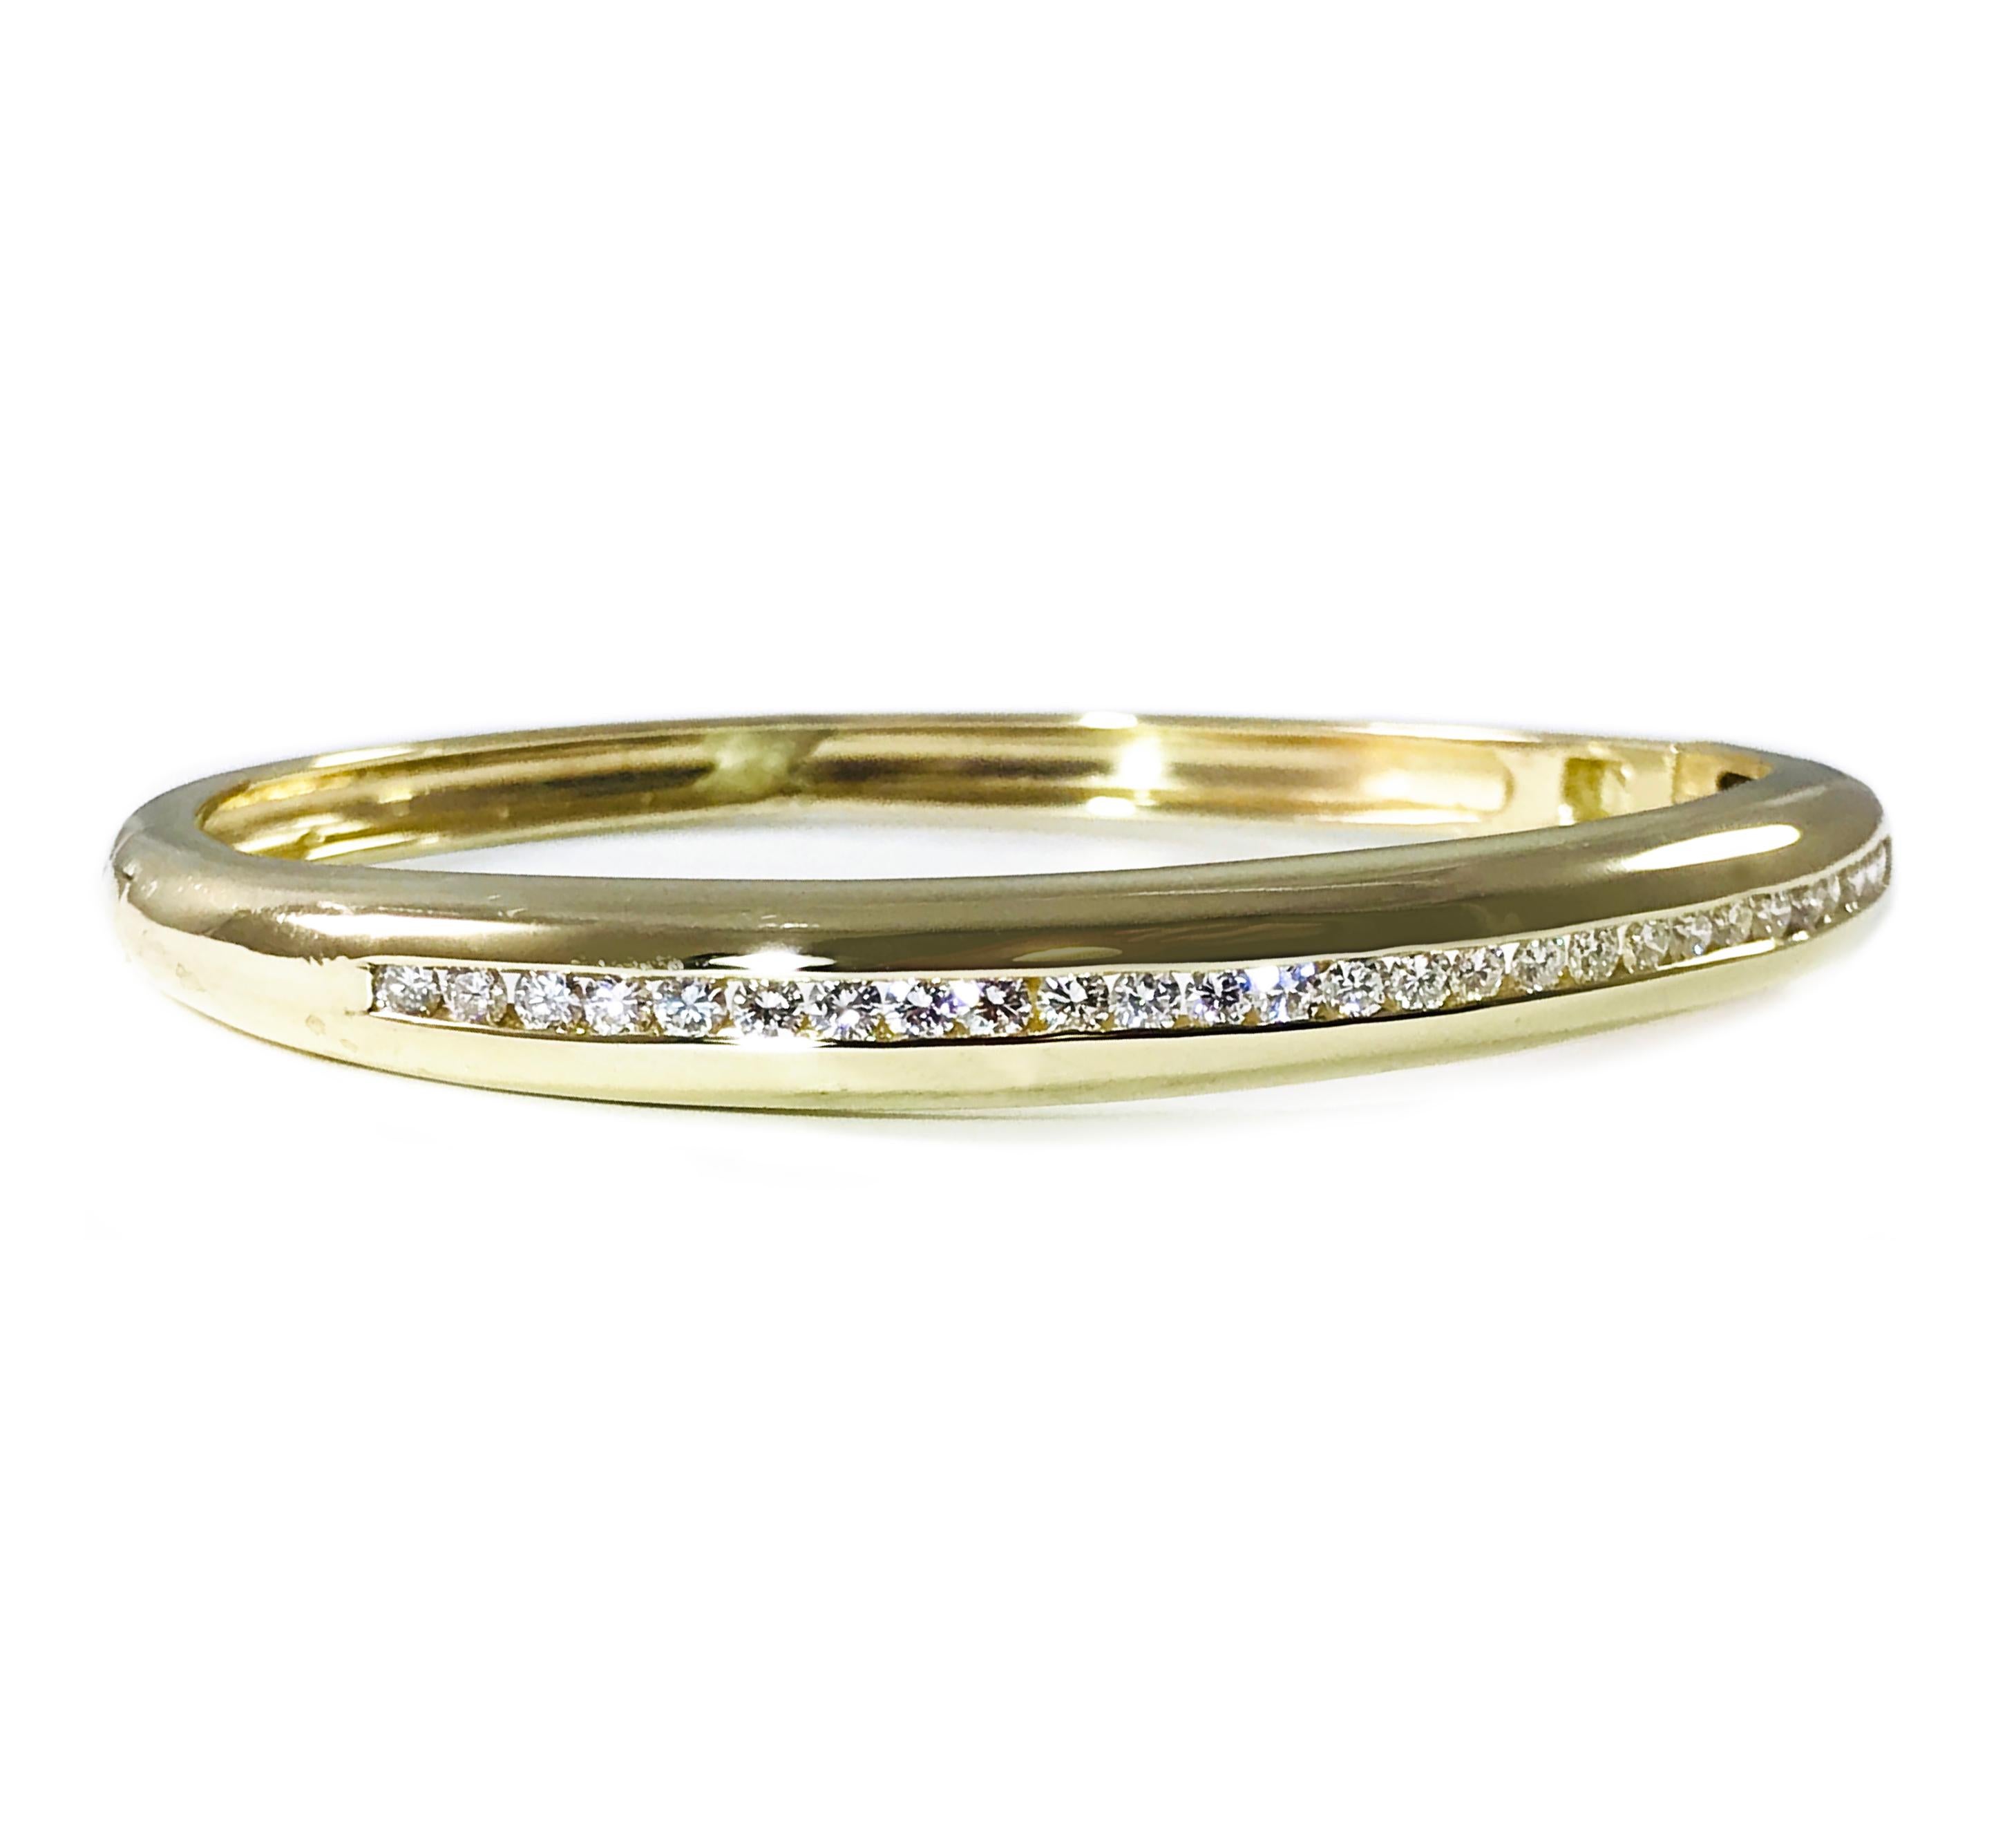 14 Karat yellow gold Diamond Bangle Bracelet. Twenty-seven Russian brilliant-cut round diamonds are channel-set in this lovely hinged bangle bracelet. Diamonds are SI1-SI2 in clarity (G.I.A.) and H-I in color (G.I.A.) for a total weight of 1.20ctw.